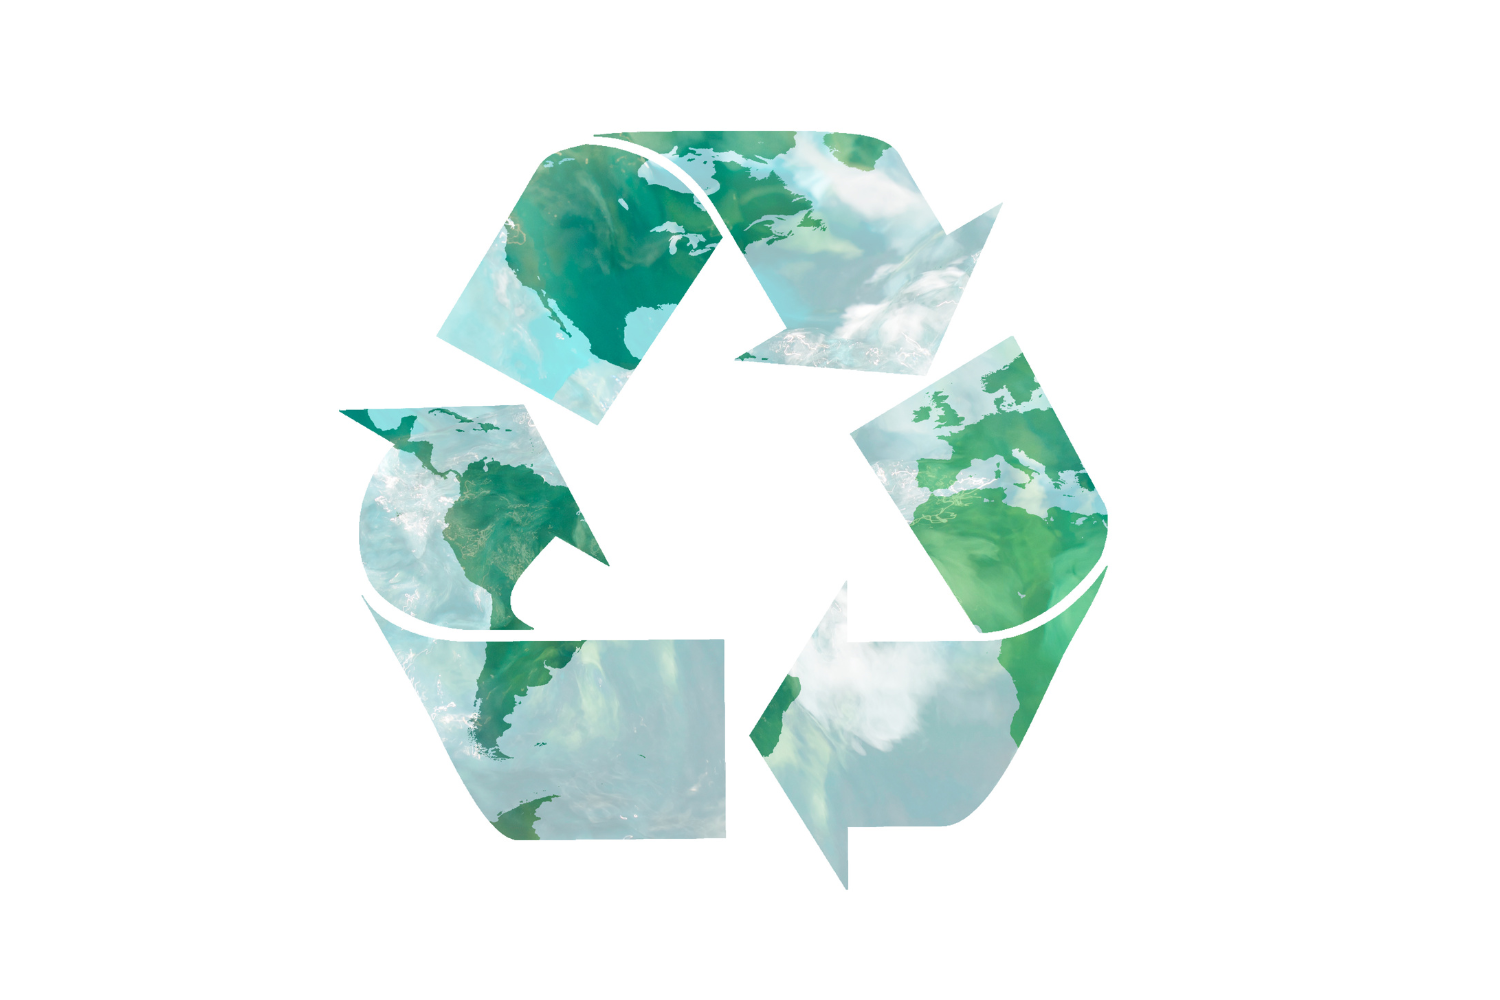 sustainable metal recycling benefits the earth